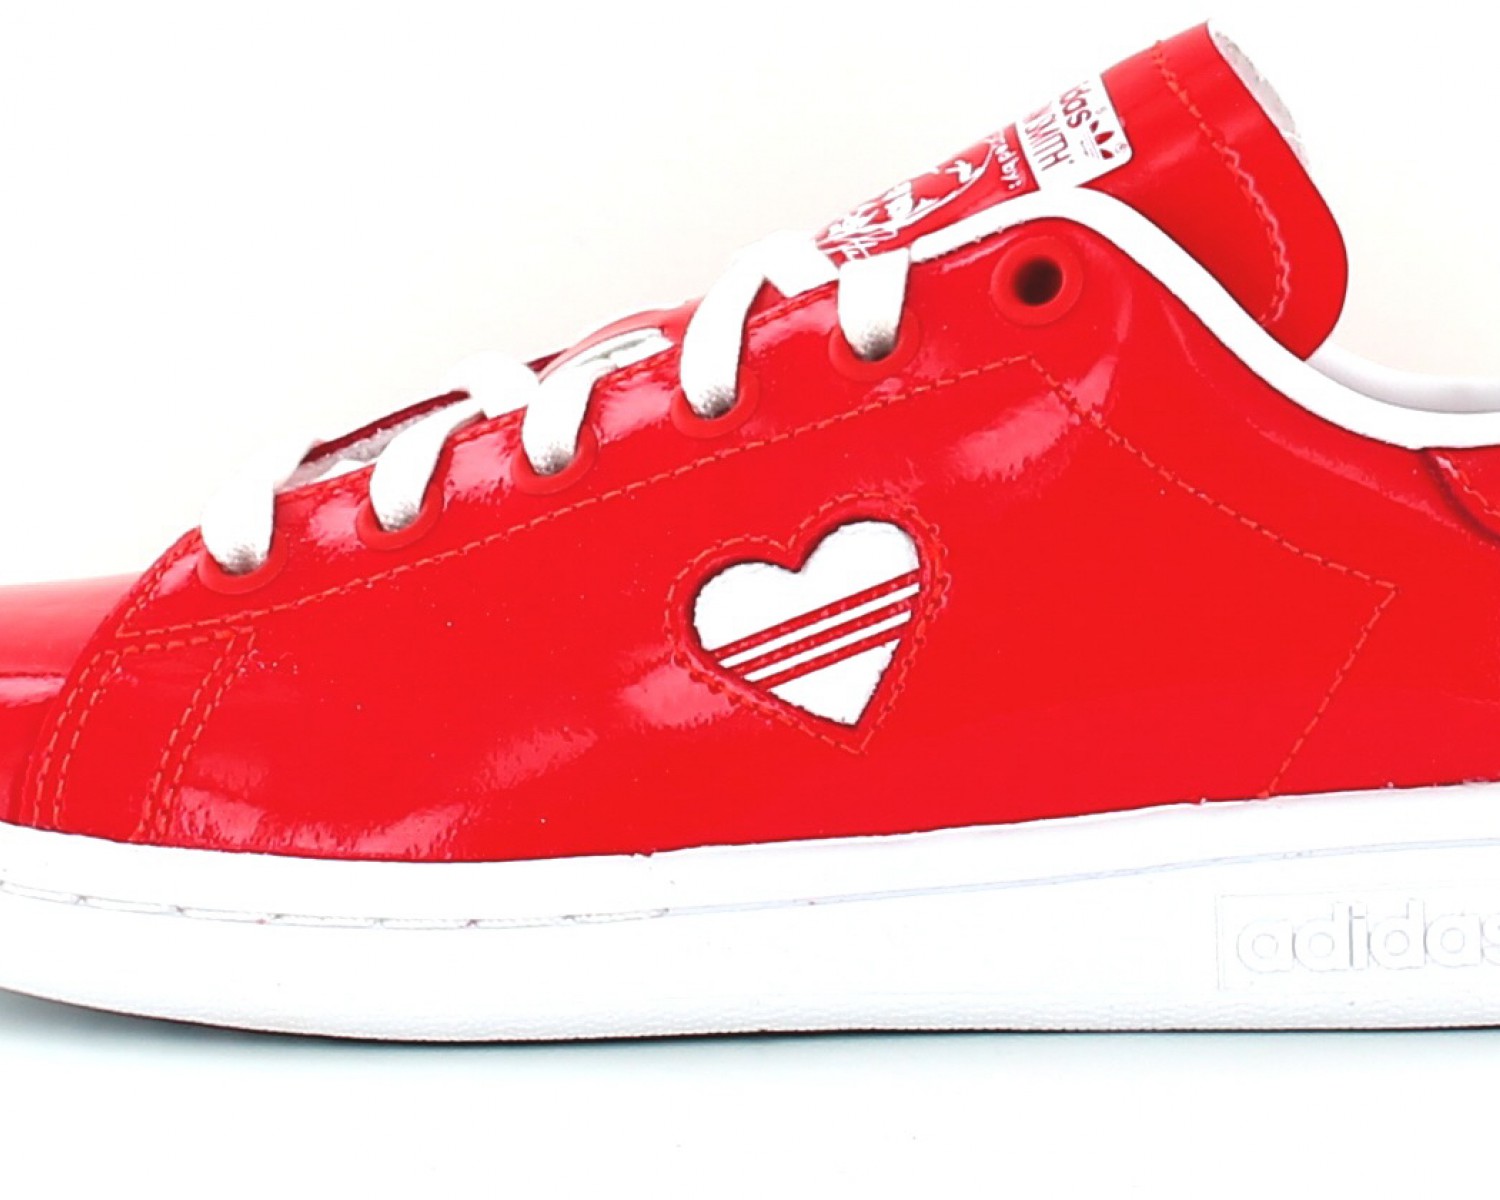 chaussure stan smith rouge